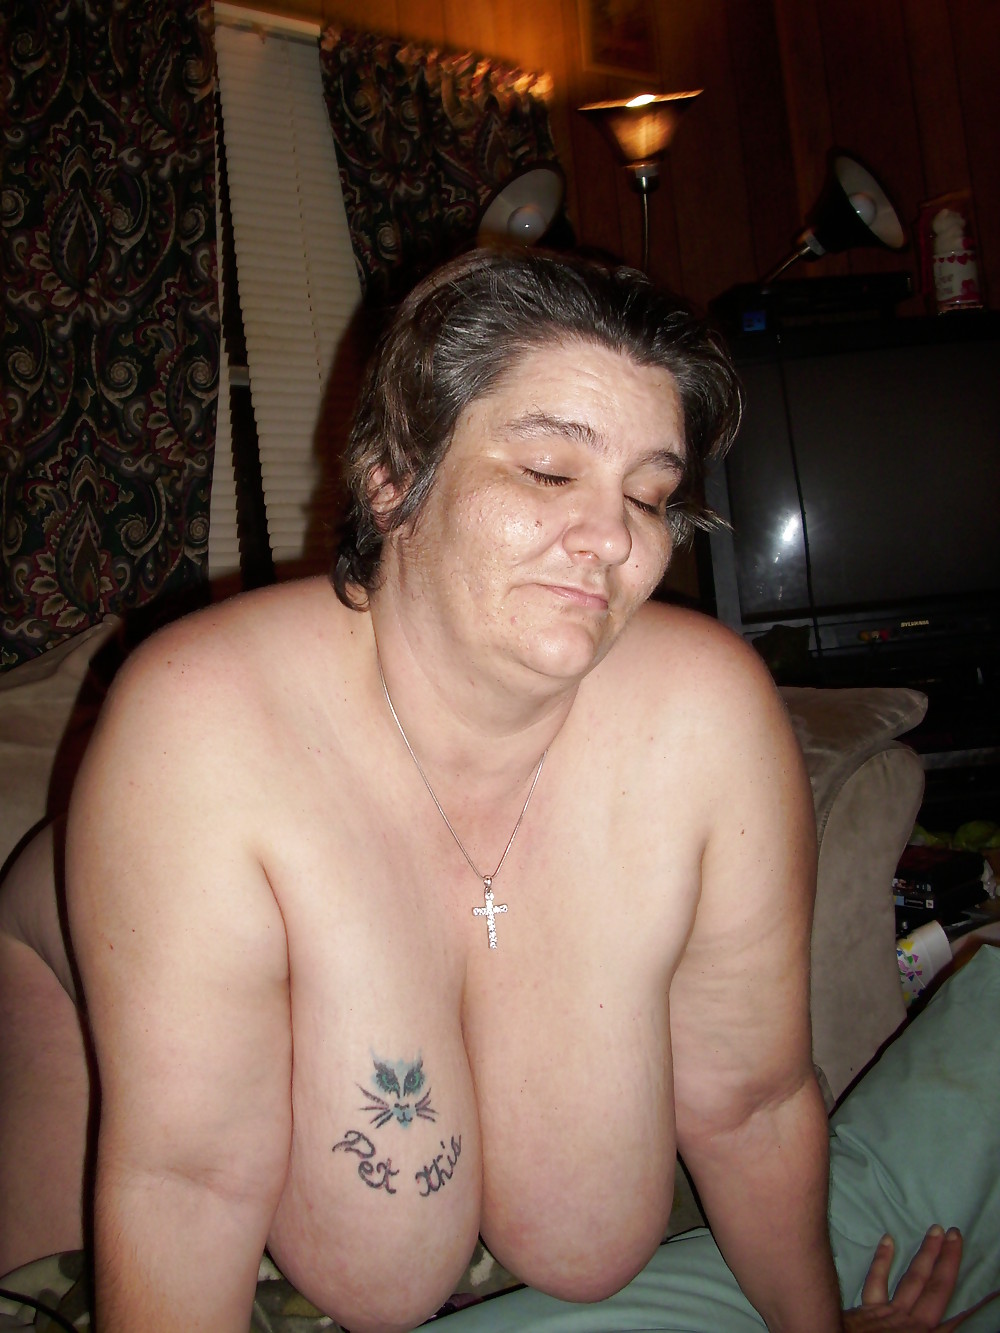 Older women with saggy tits. adult photos